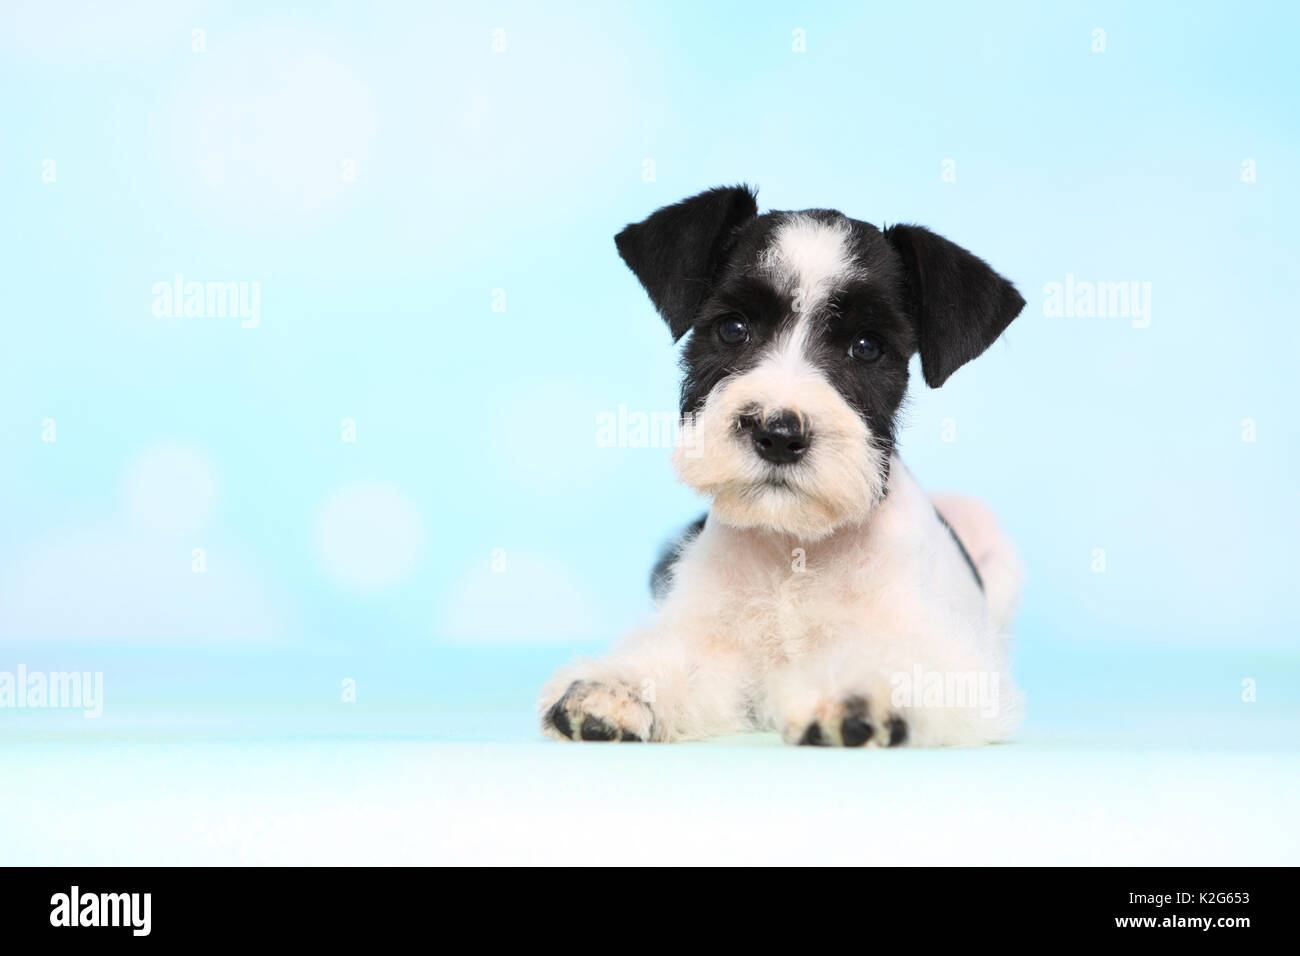 Parti-colored Miniature Schnauzer. Puppy lying, seen against a light blue background. Germany Stock Photo